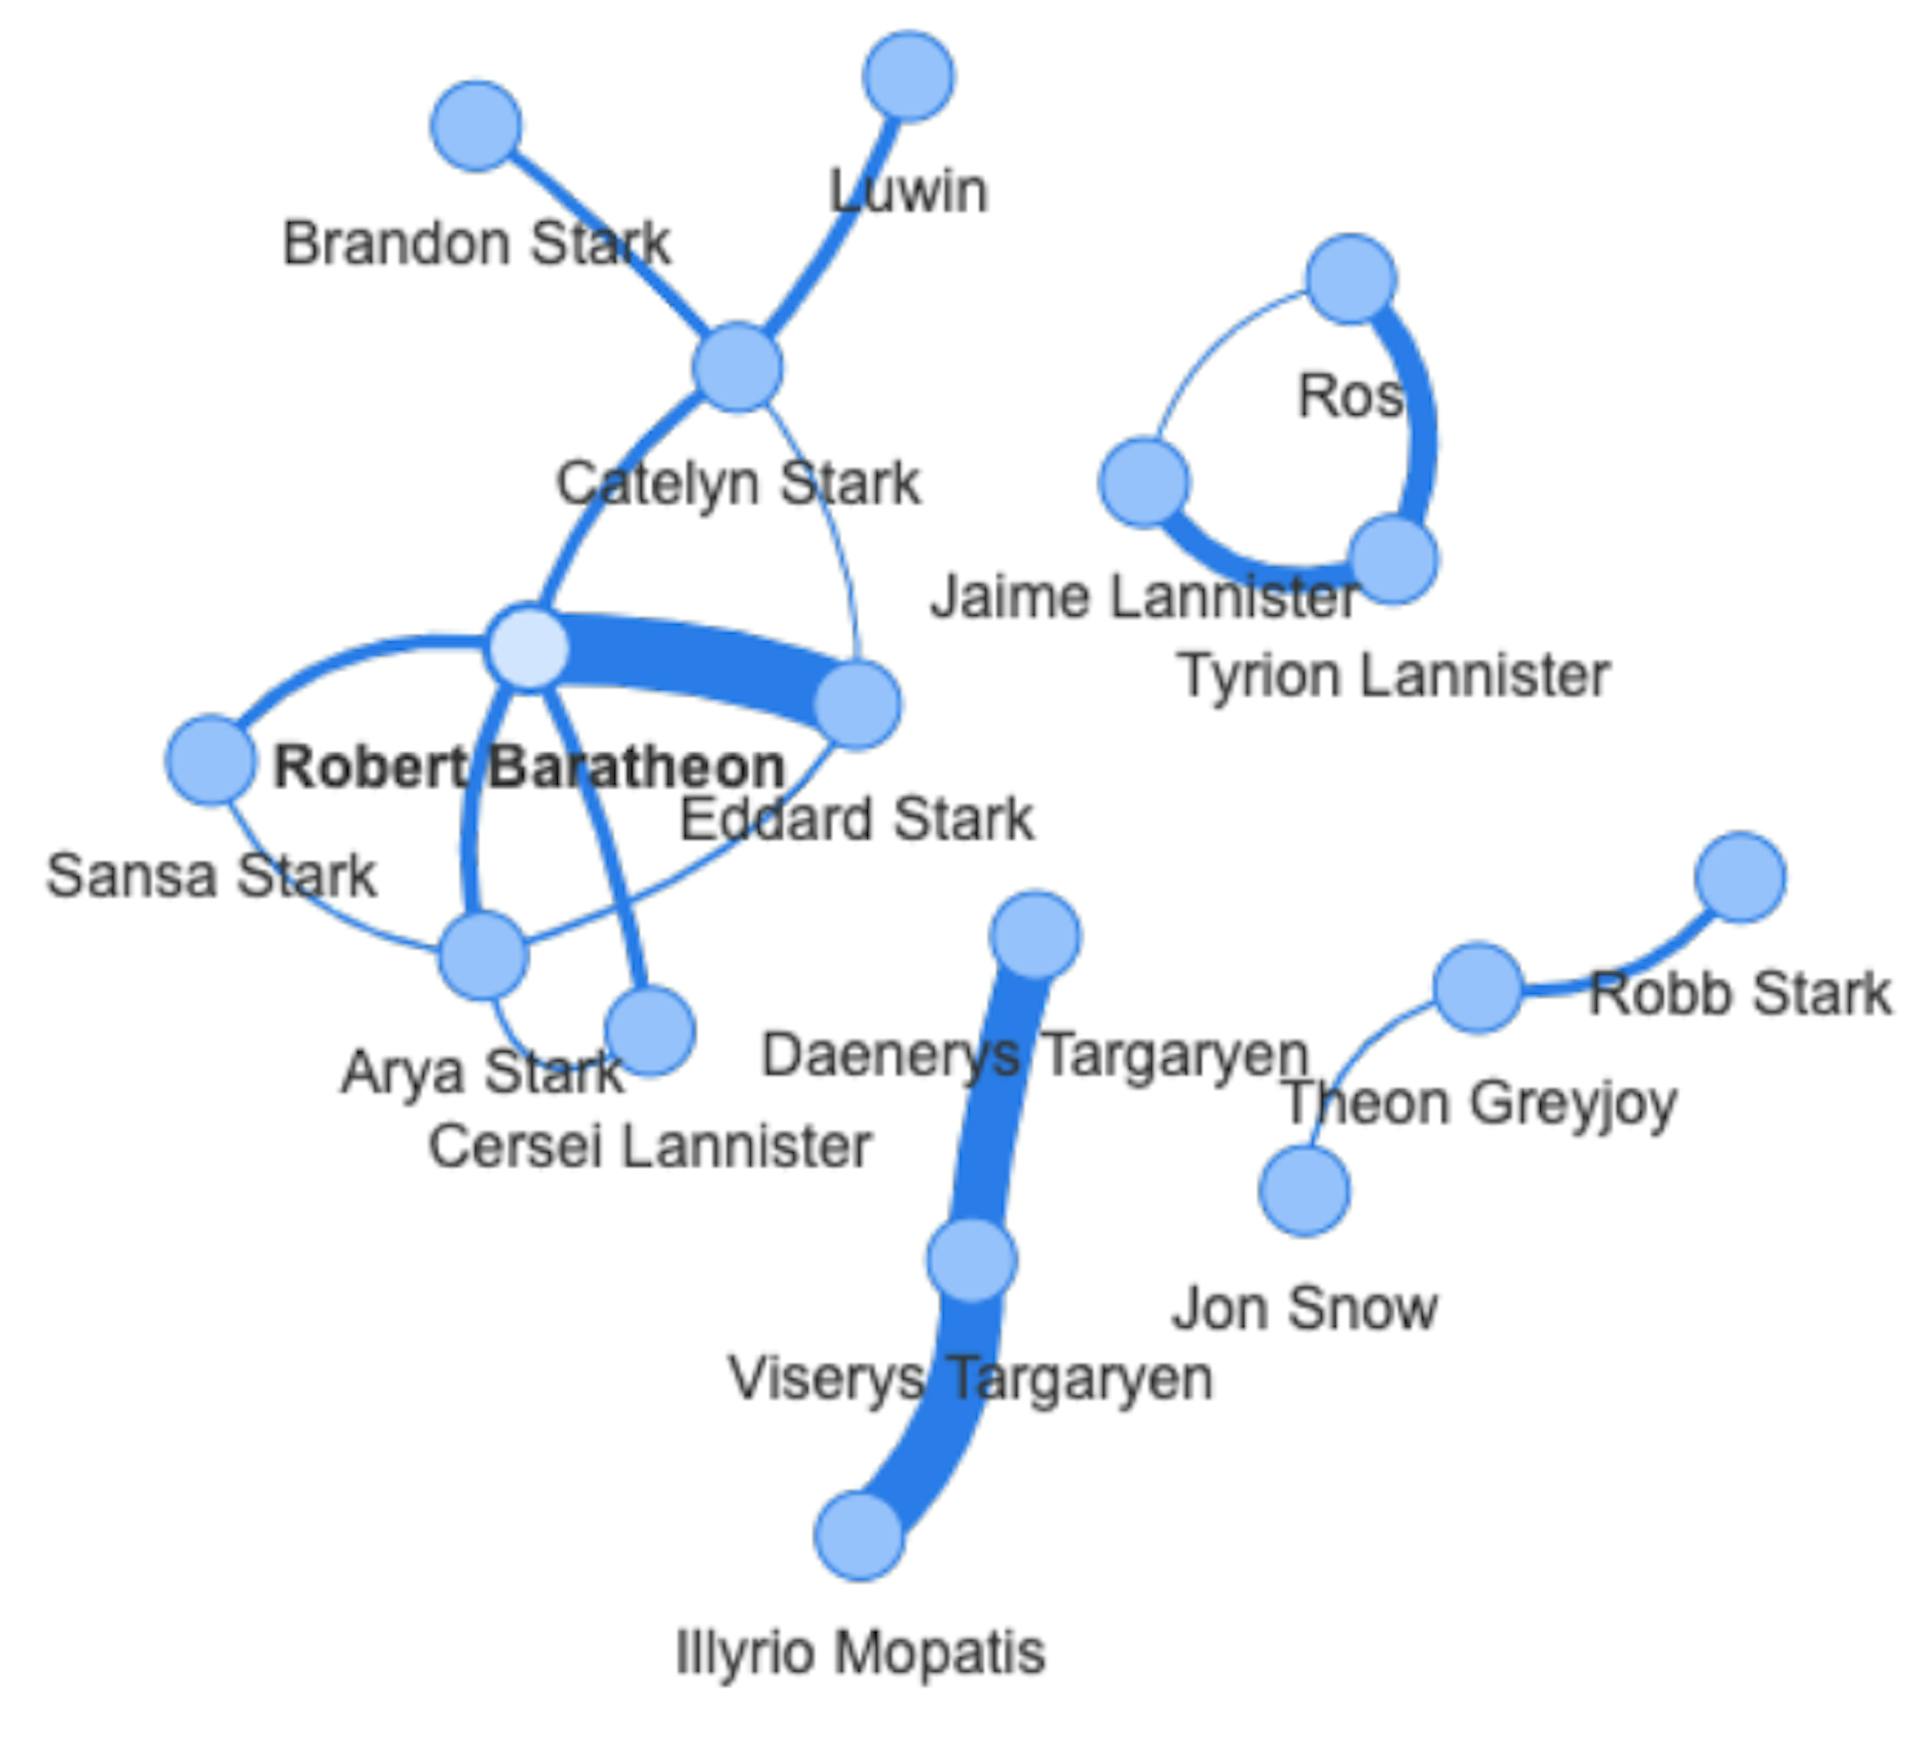 Fig. 1. Game of Throne Season 1, Episode 1, S120-S130 Character Network.